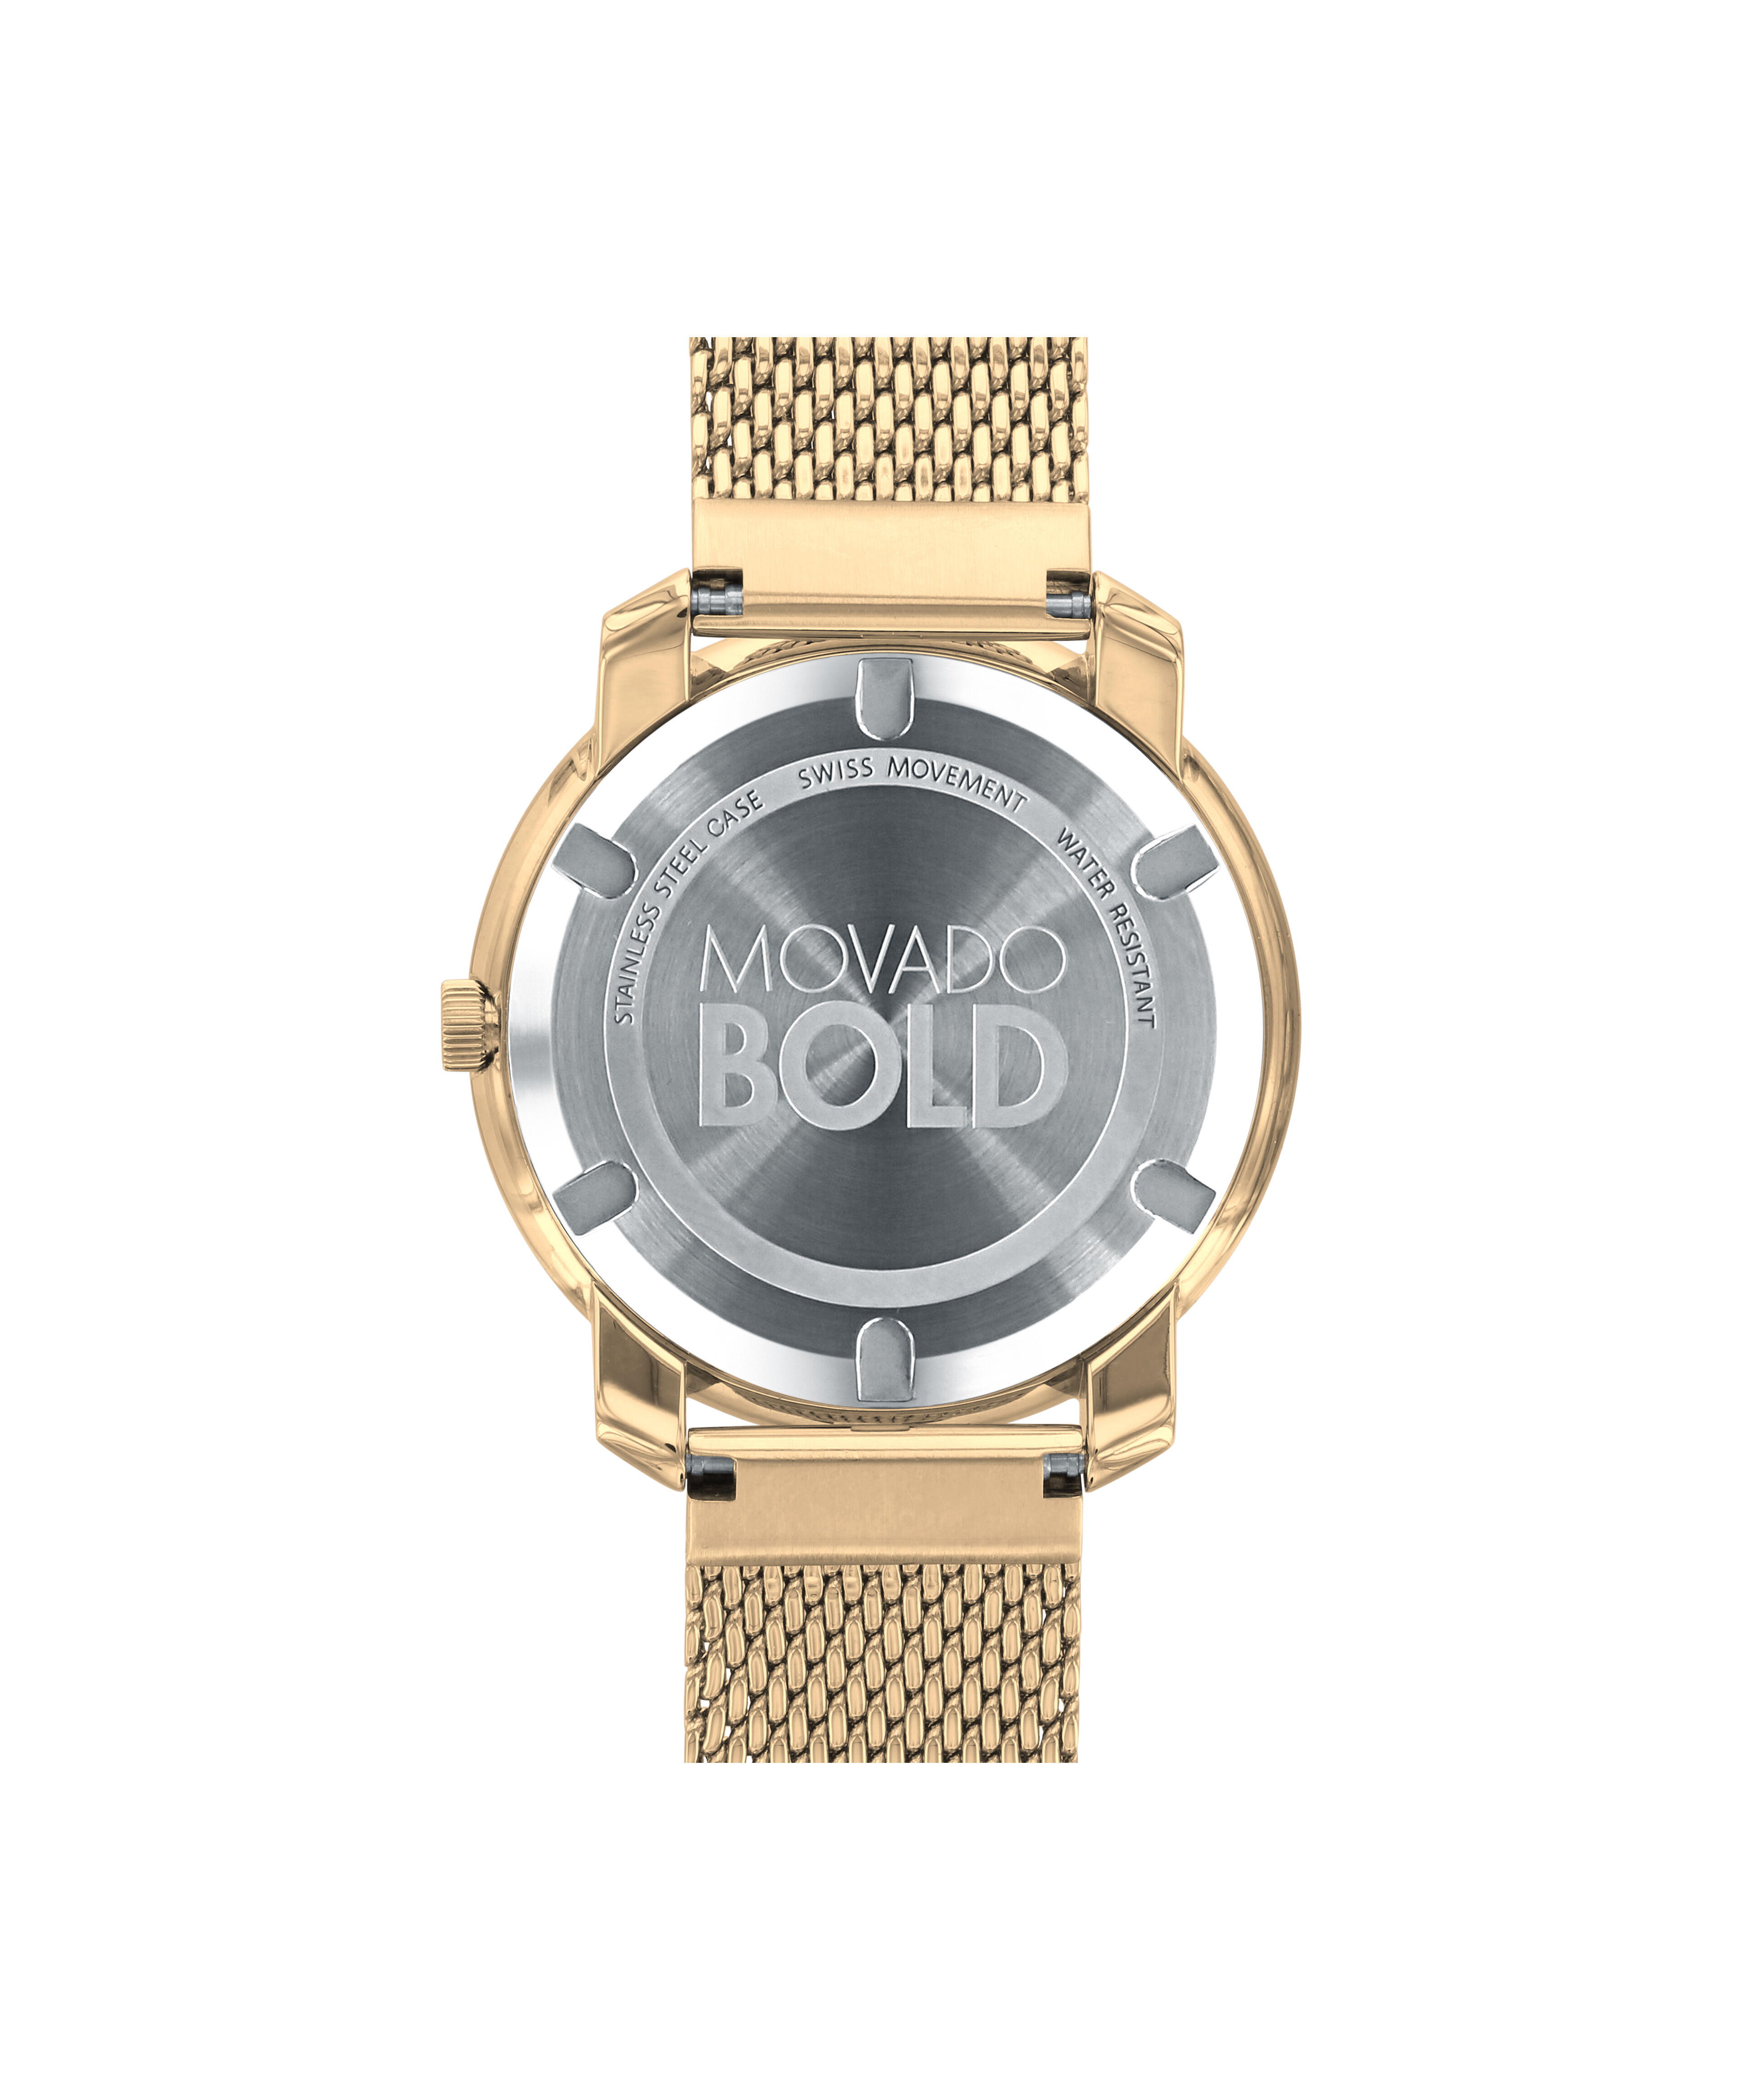 Replications Bedat Co Watches